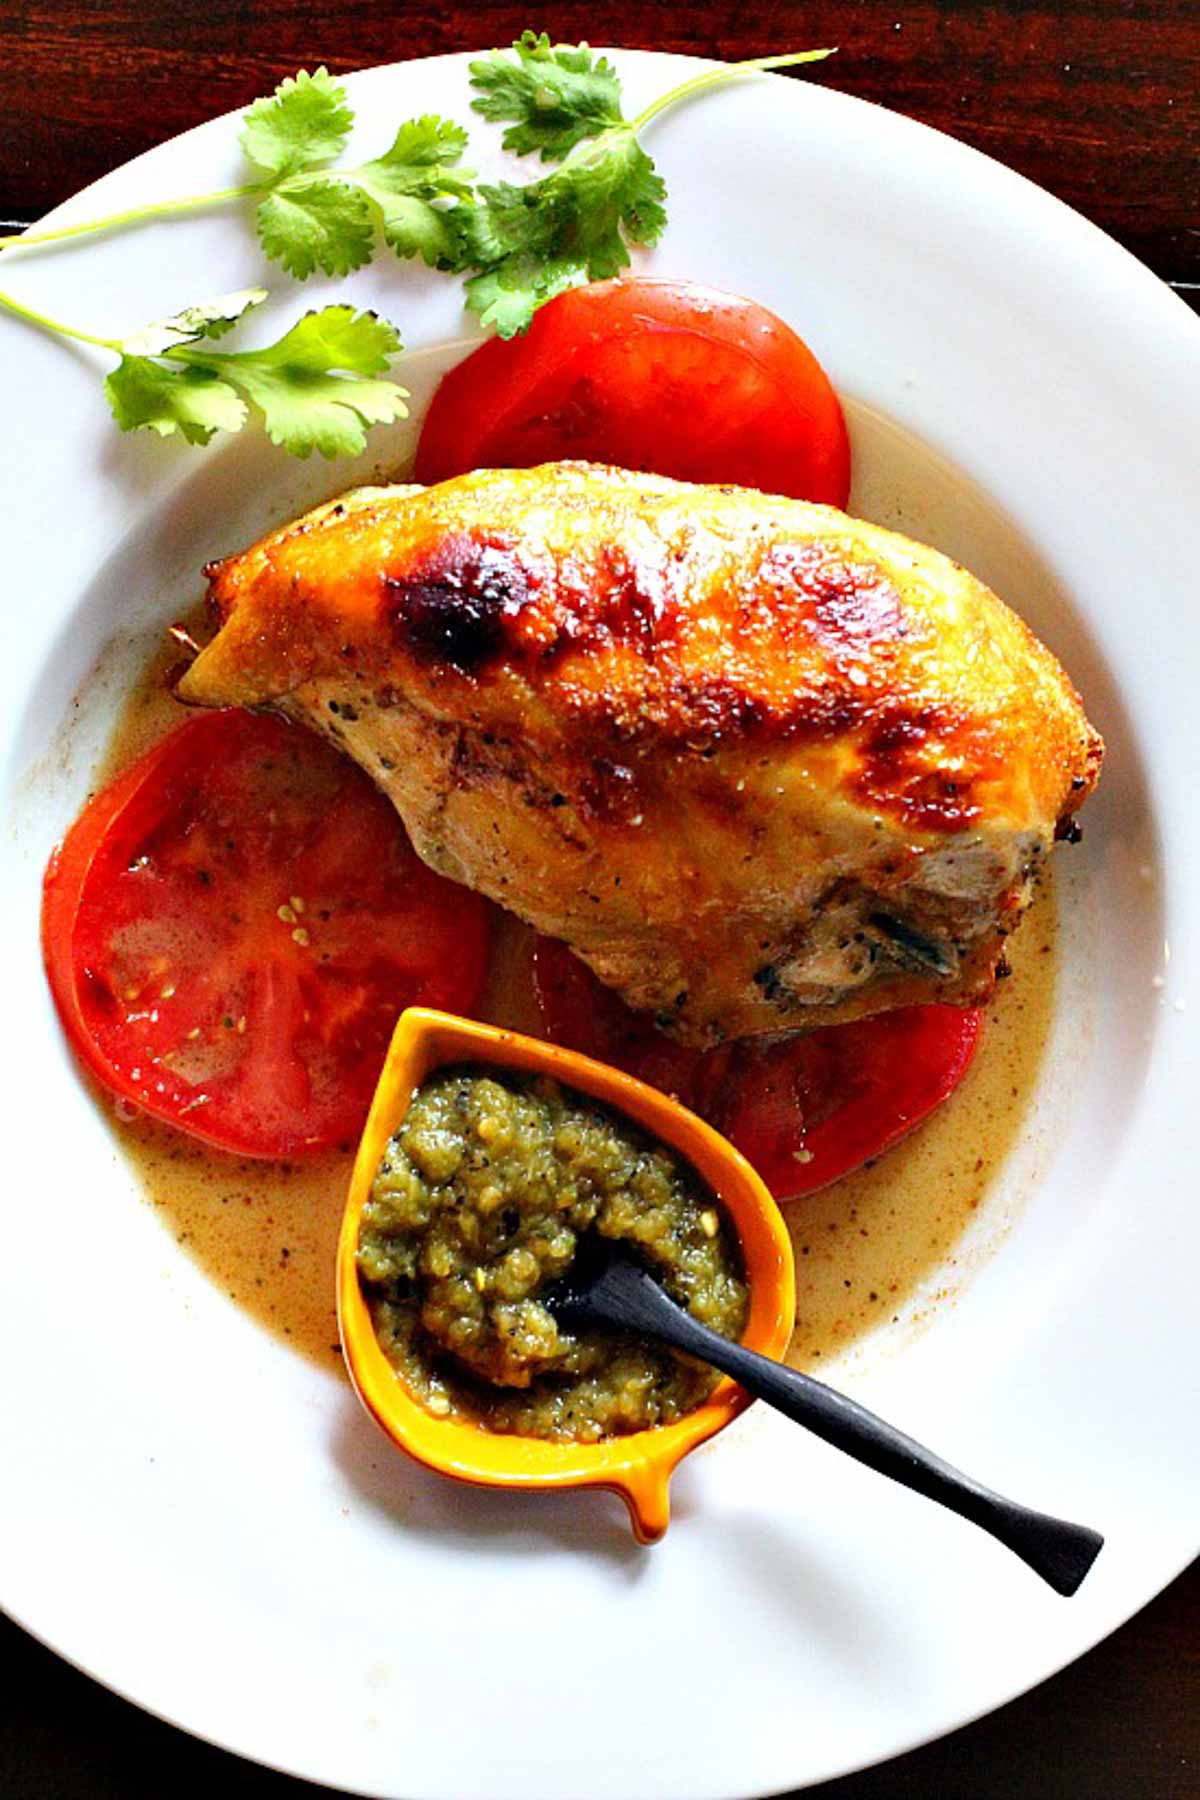 Roasted chicken breast served over fresh tomatoes with salsa verde.